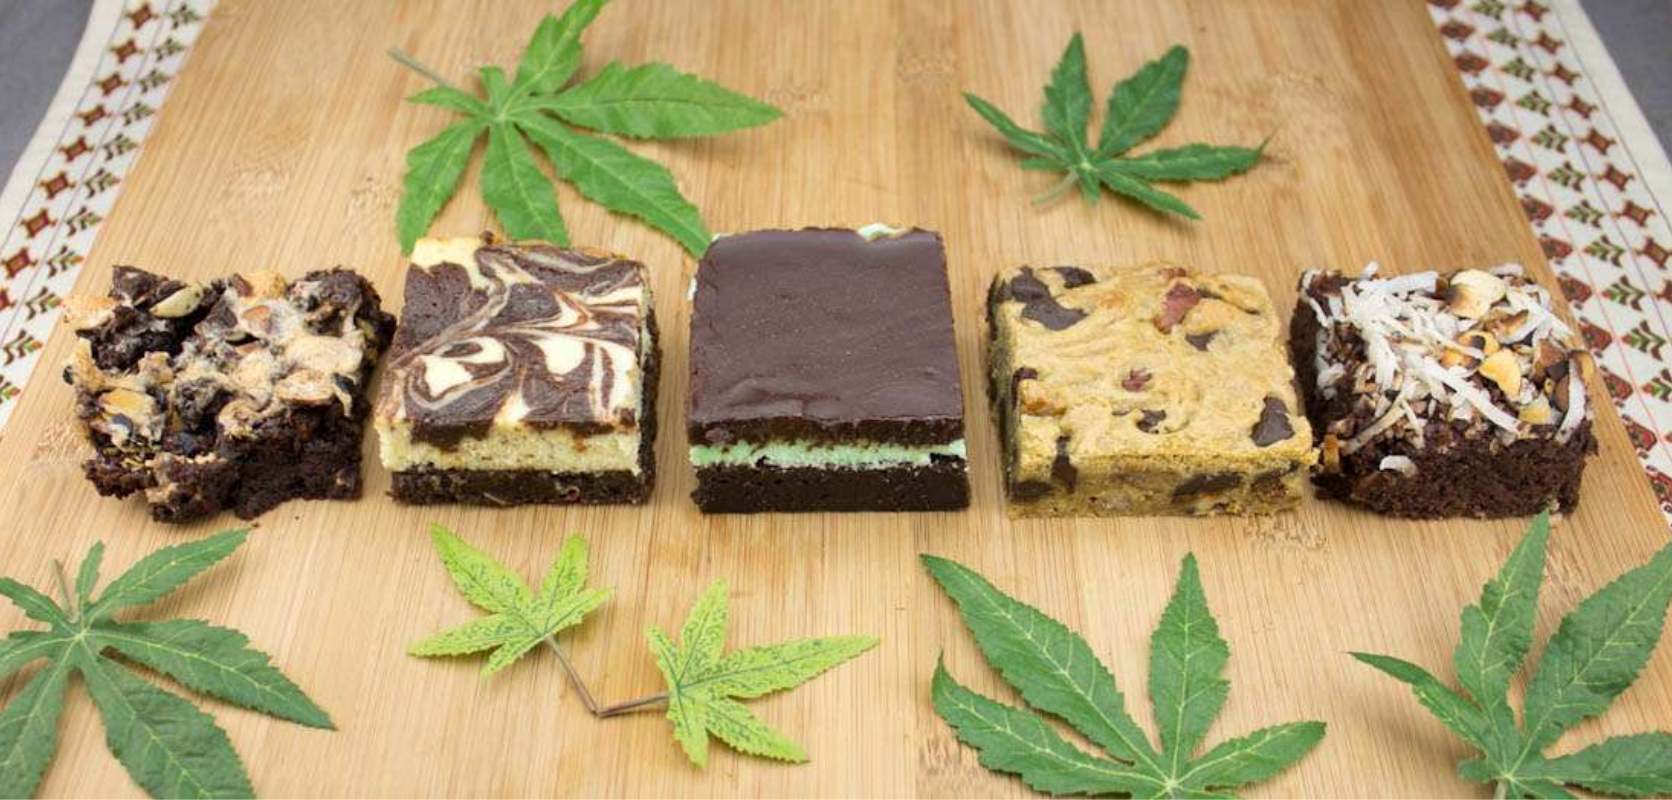 While making a cannabis chocolate cake can seem easy and simple, there are some common mistakes you can make when starting off. 